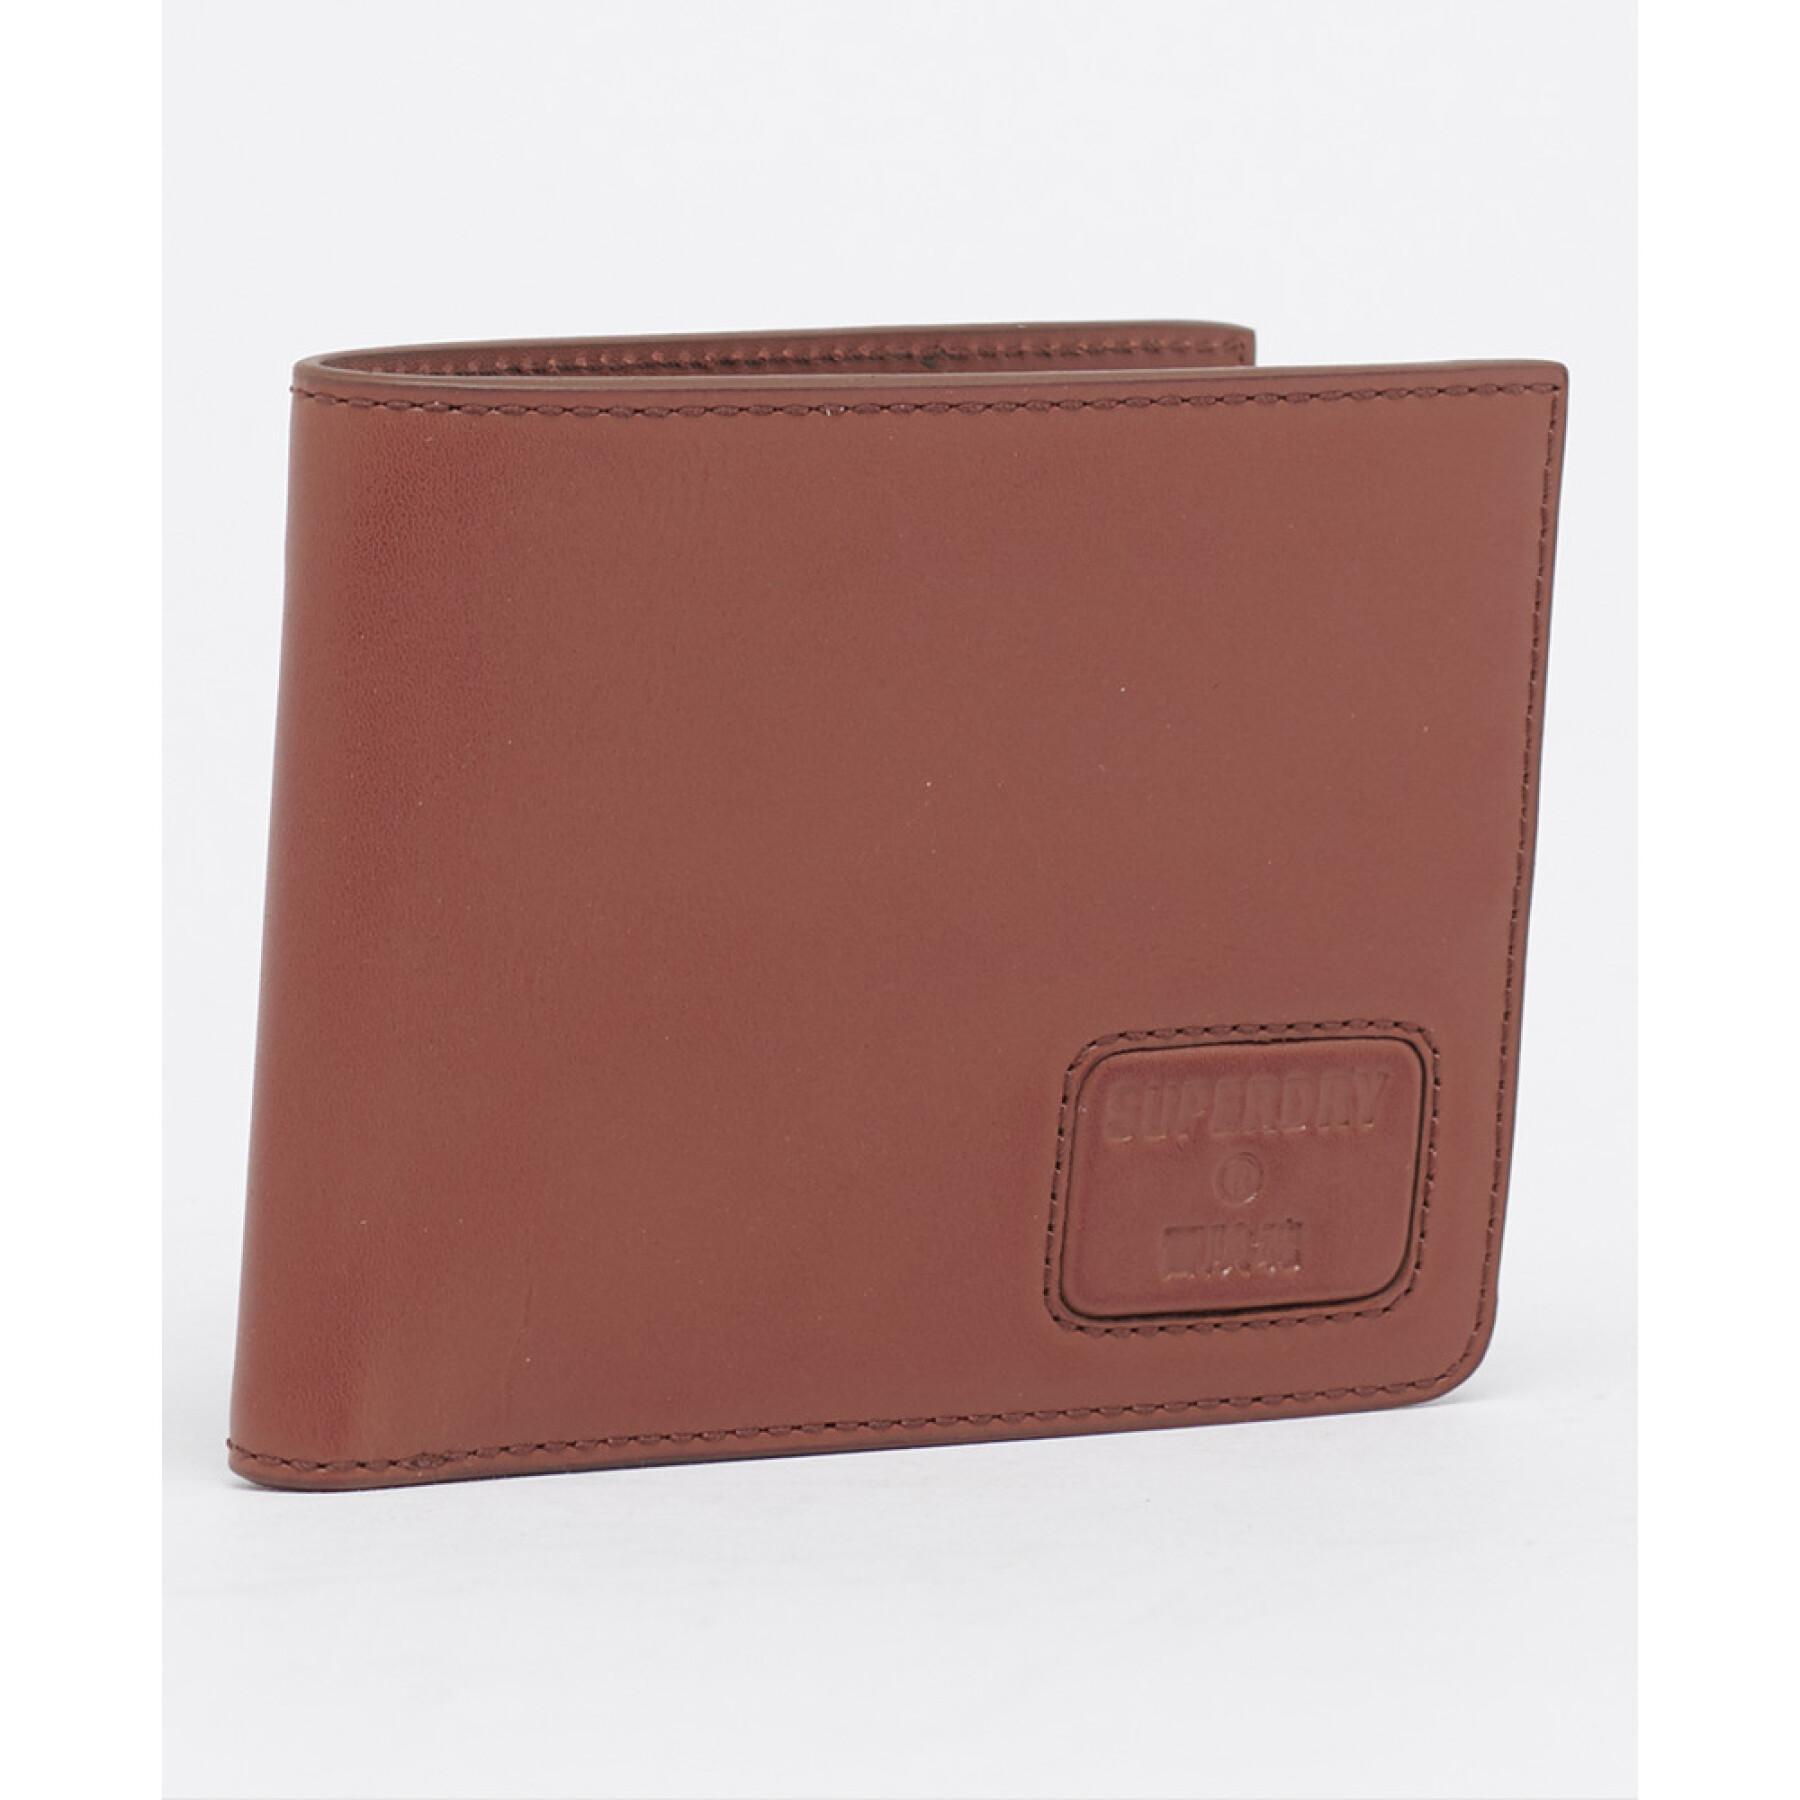 Leather wallet with flap Superdry NYC